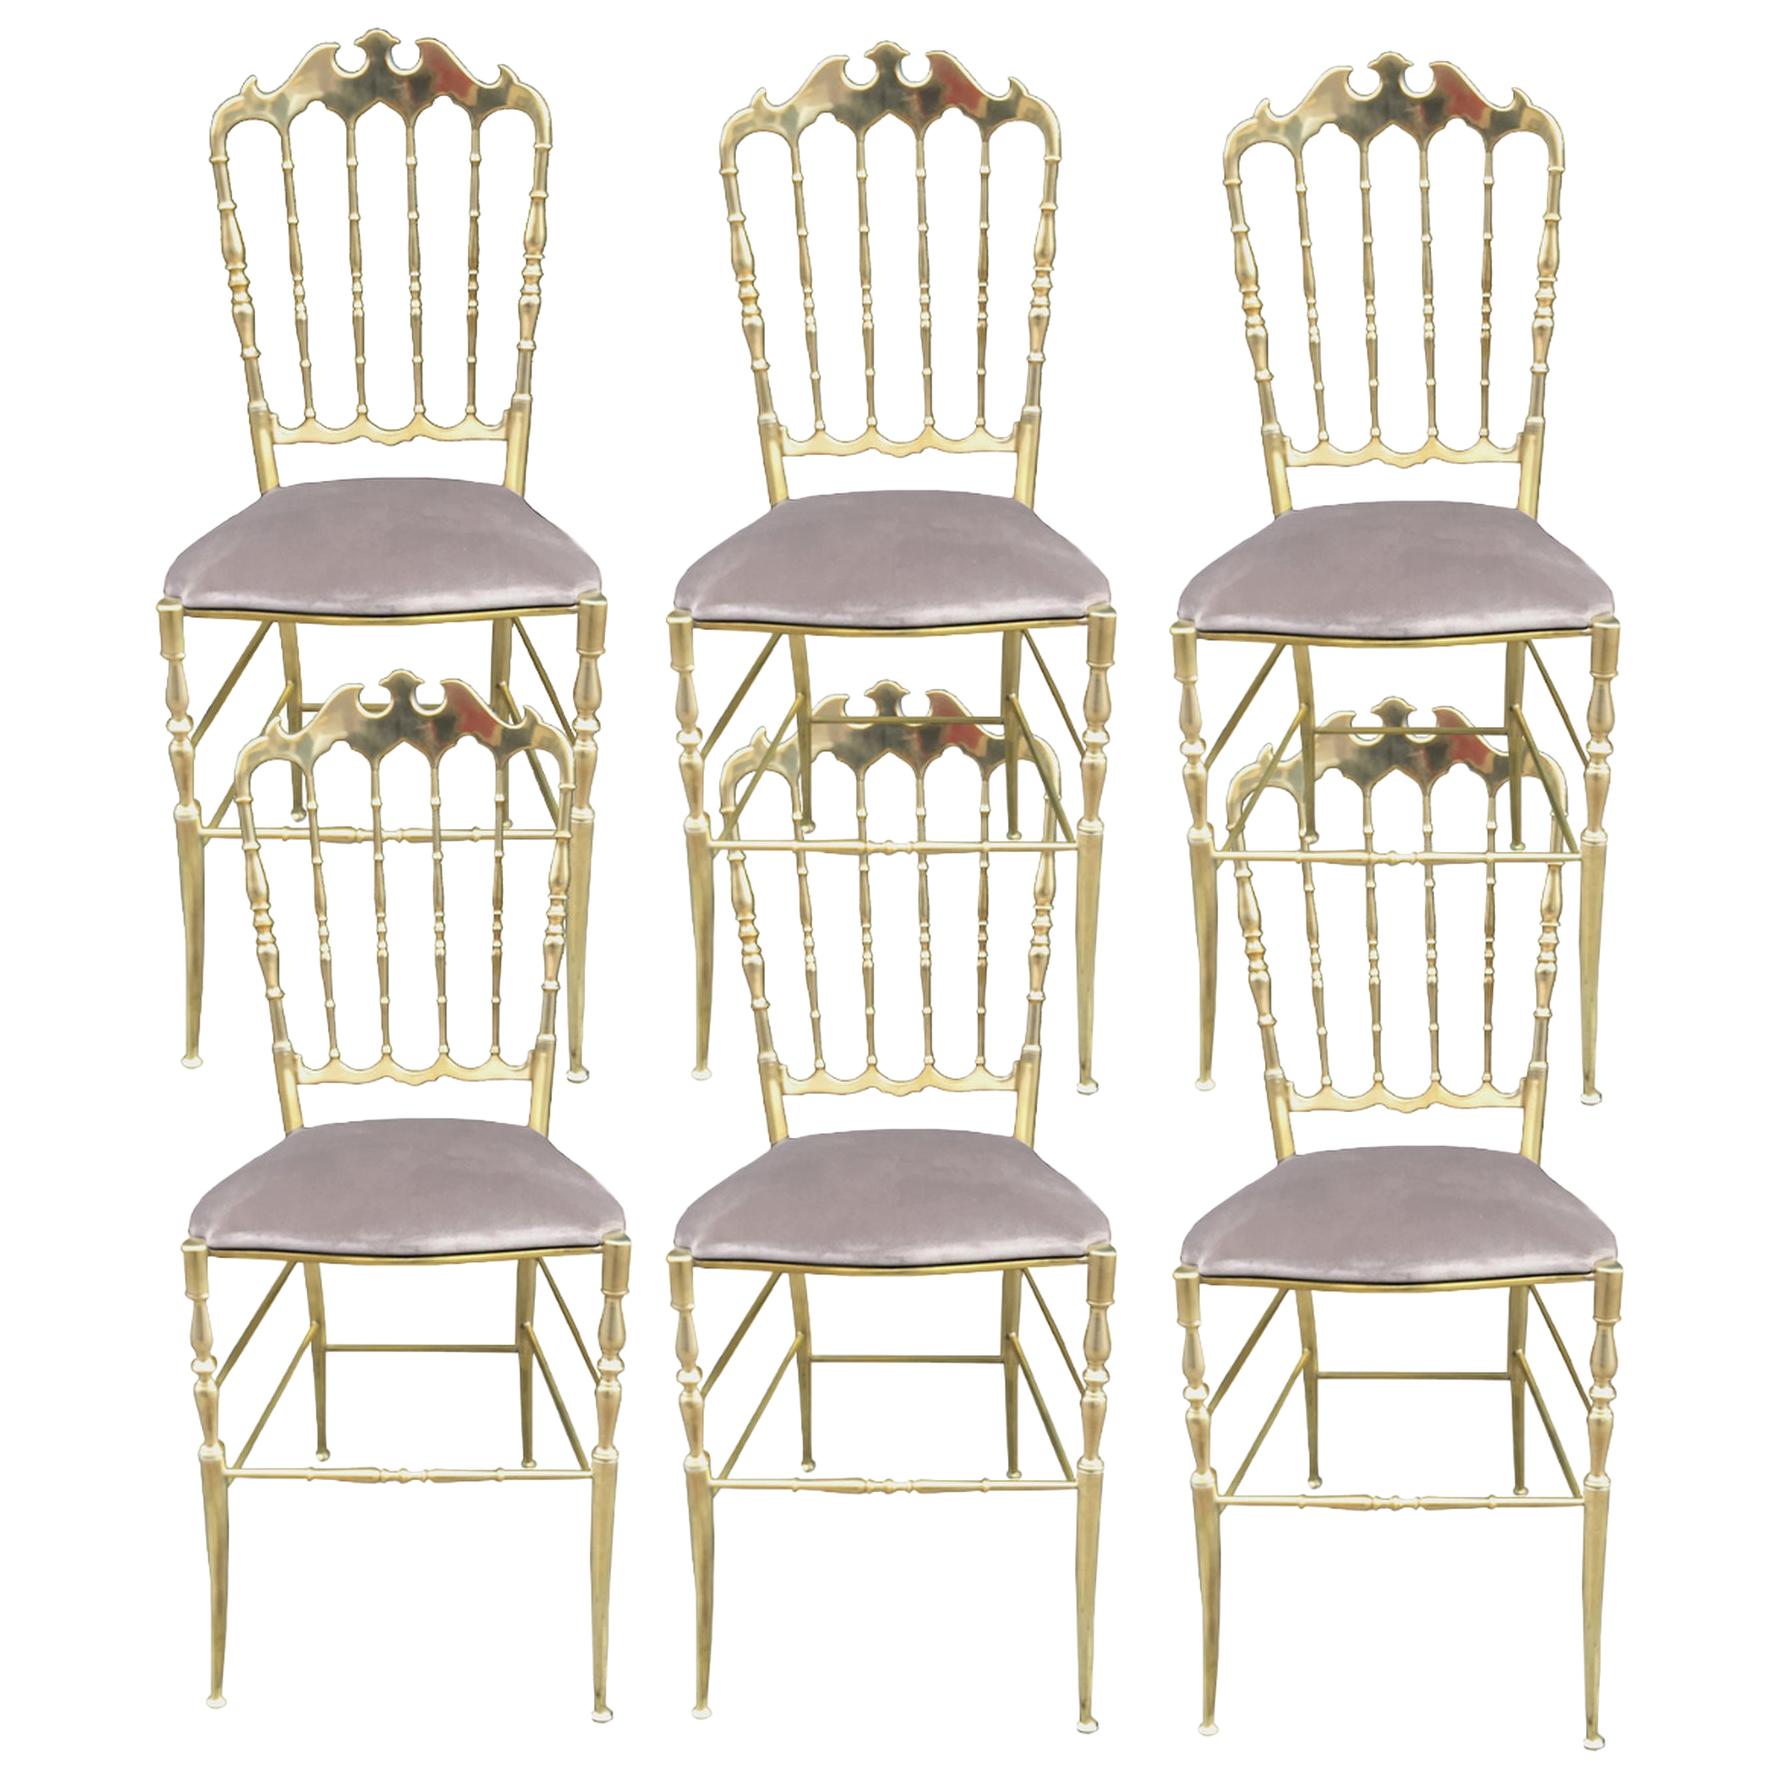 Set of Six Chairs in Turned and Polished Brass, Chiavari, Italy, circa 1960